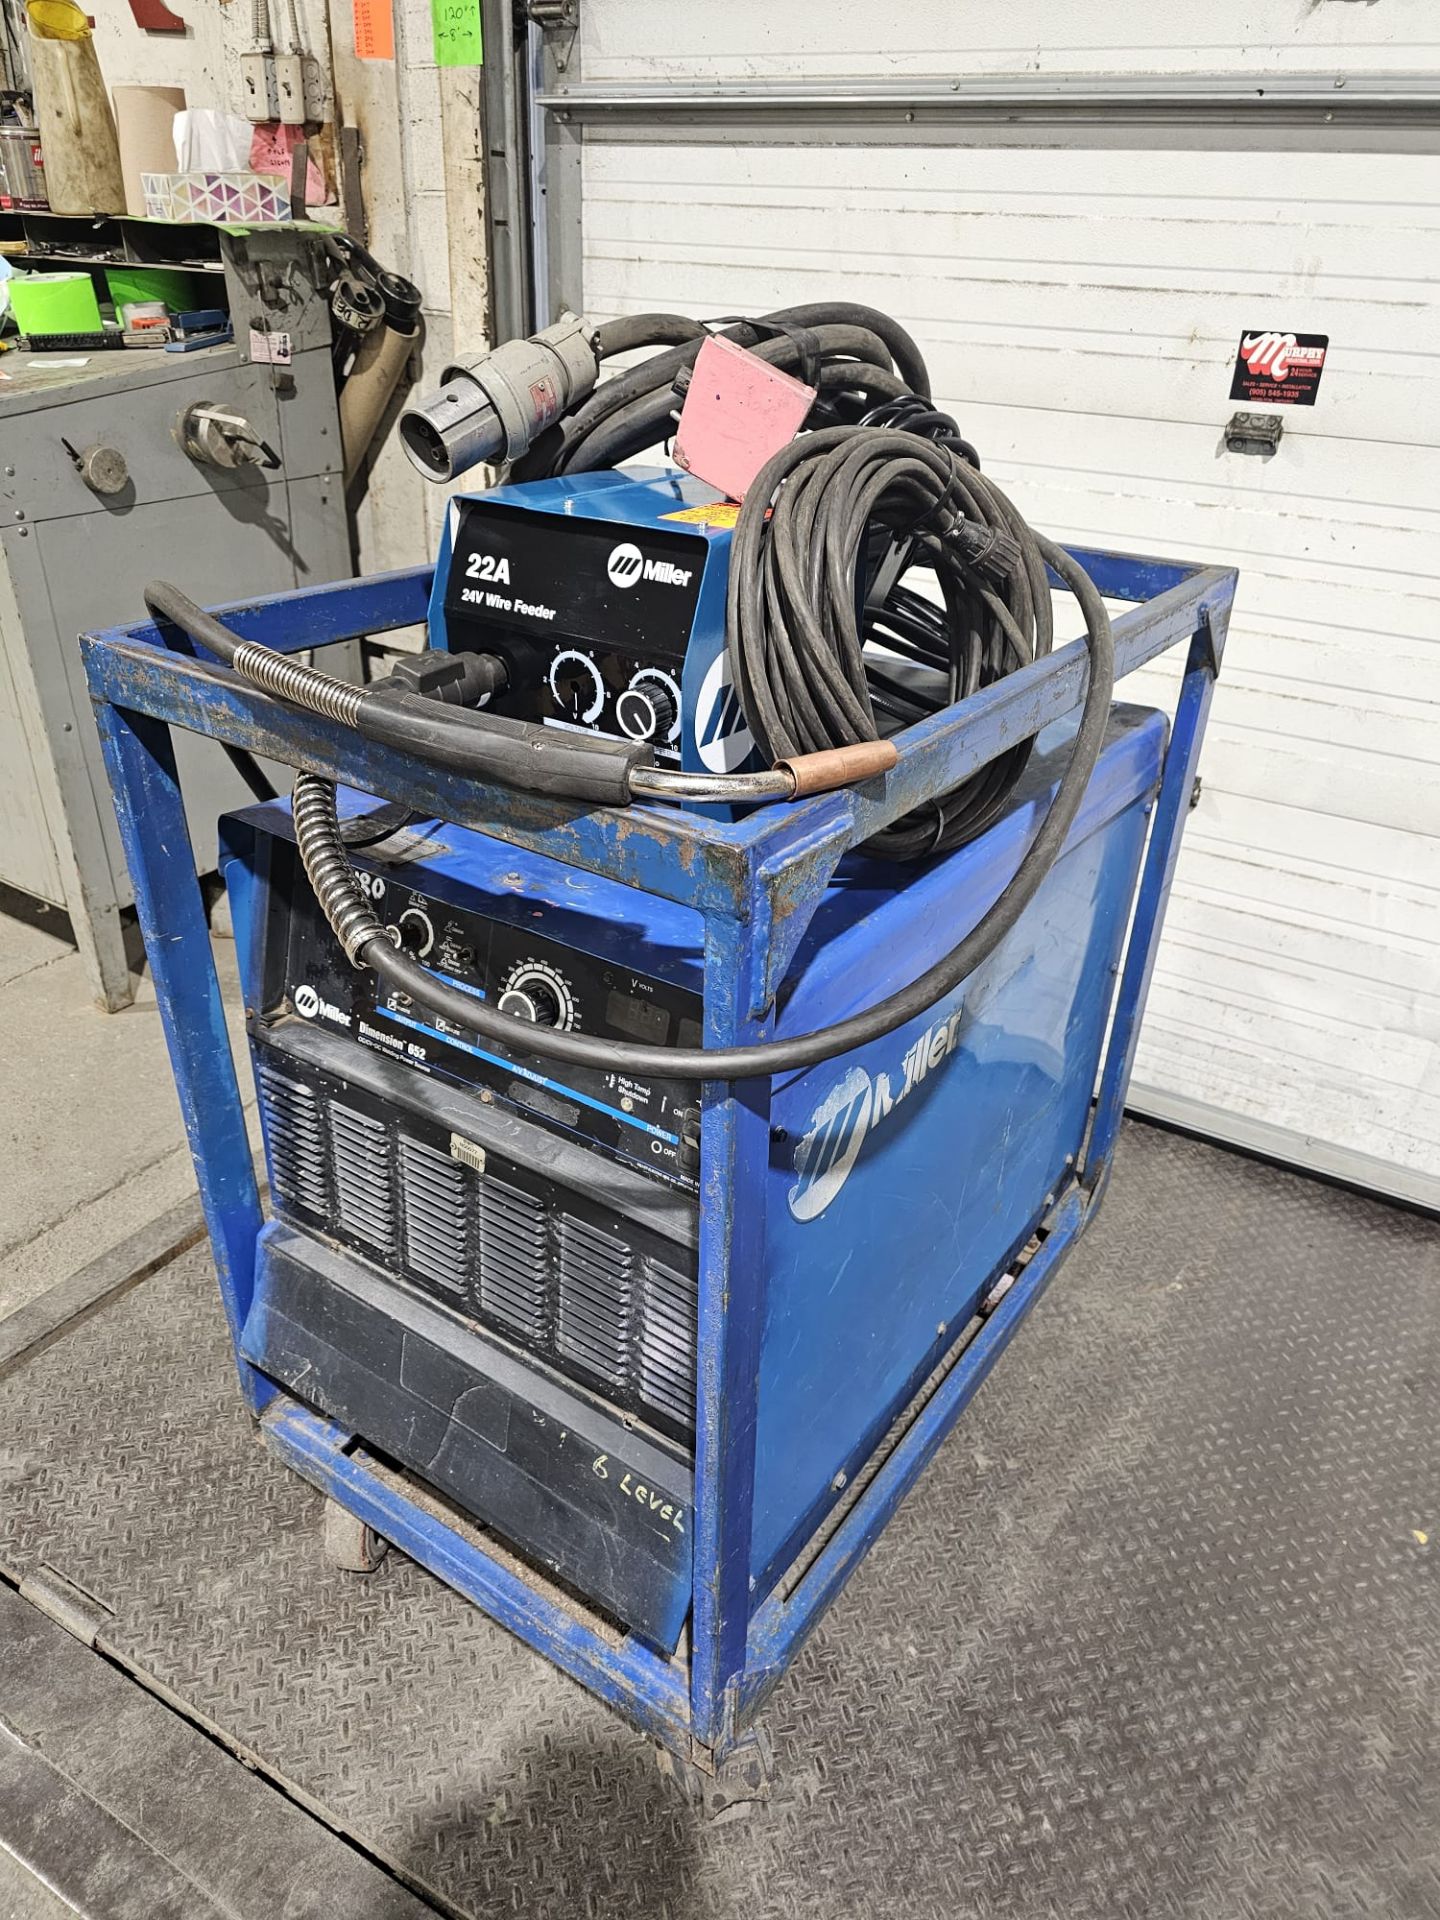 Miller Dimension 652 Mig Welder 650 Amp Mig Tig Stick Multi Process Power Source with 22A Wire - Image 4 of 9